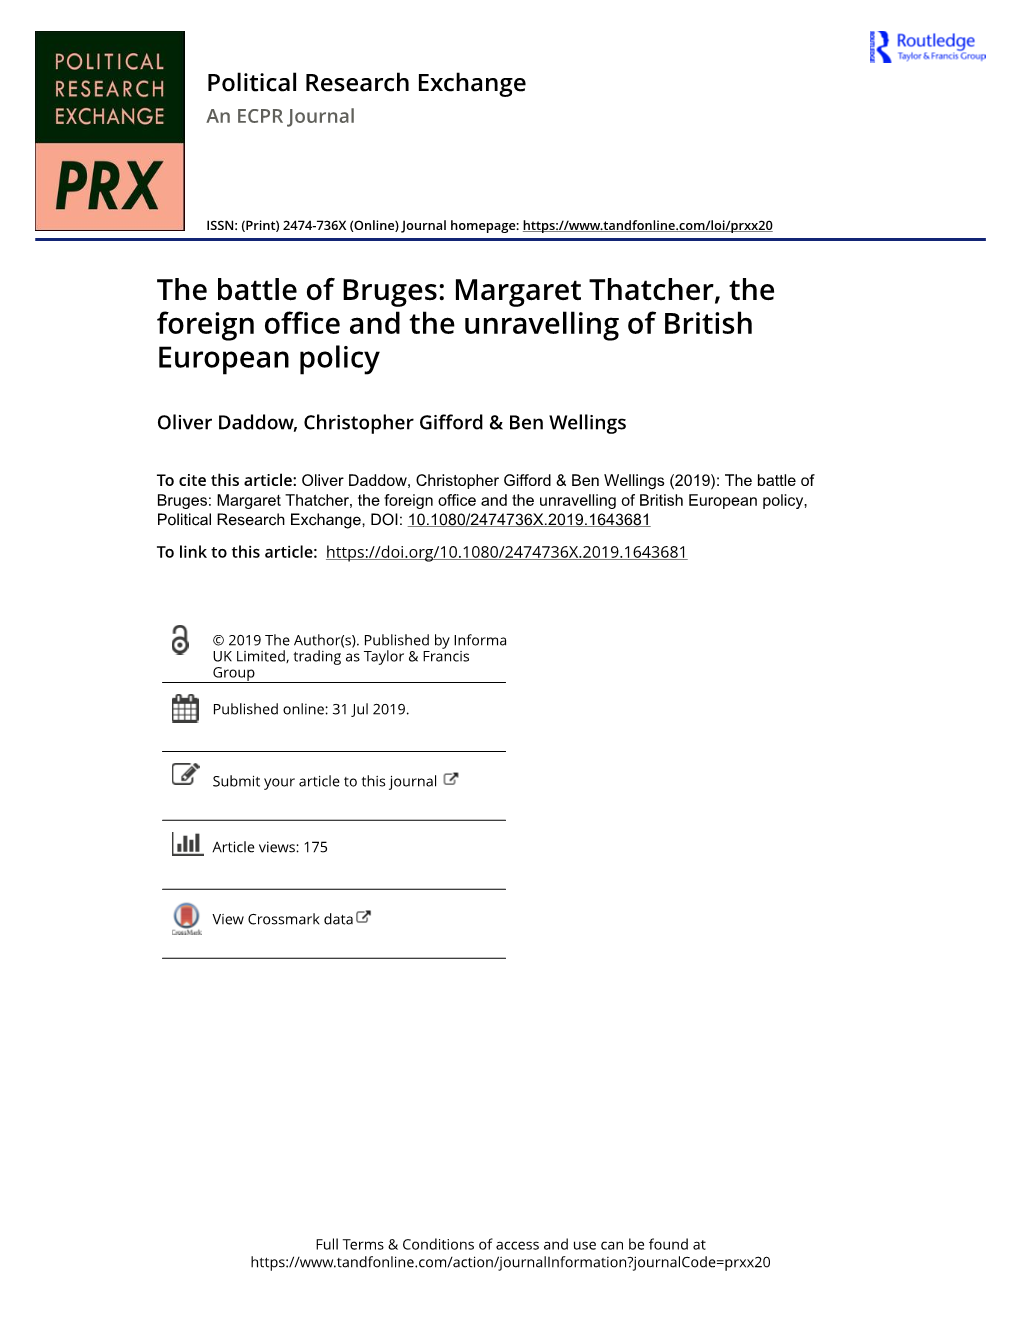 Margaret Thatcher, the Foreign Office and the Unravelling of British European Policy